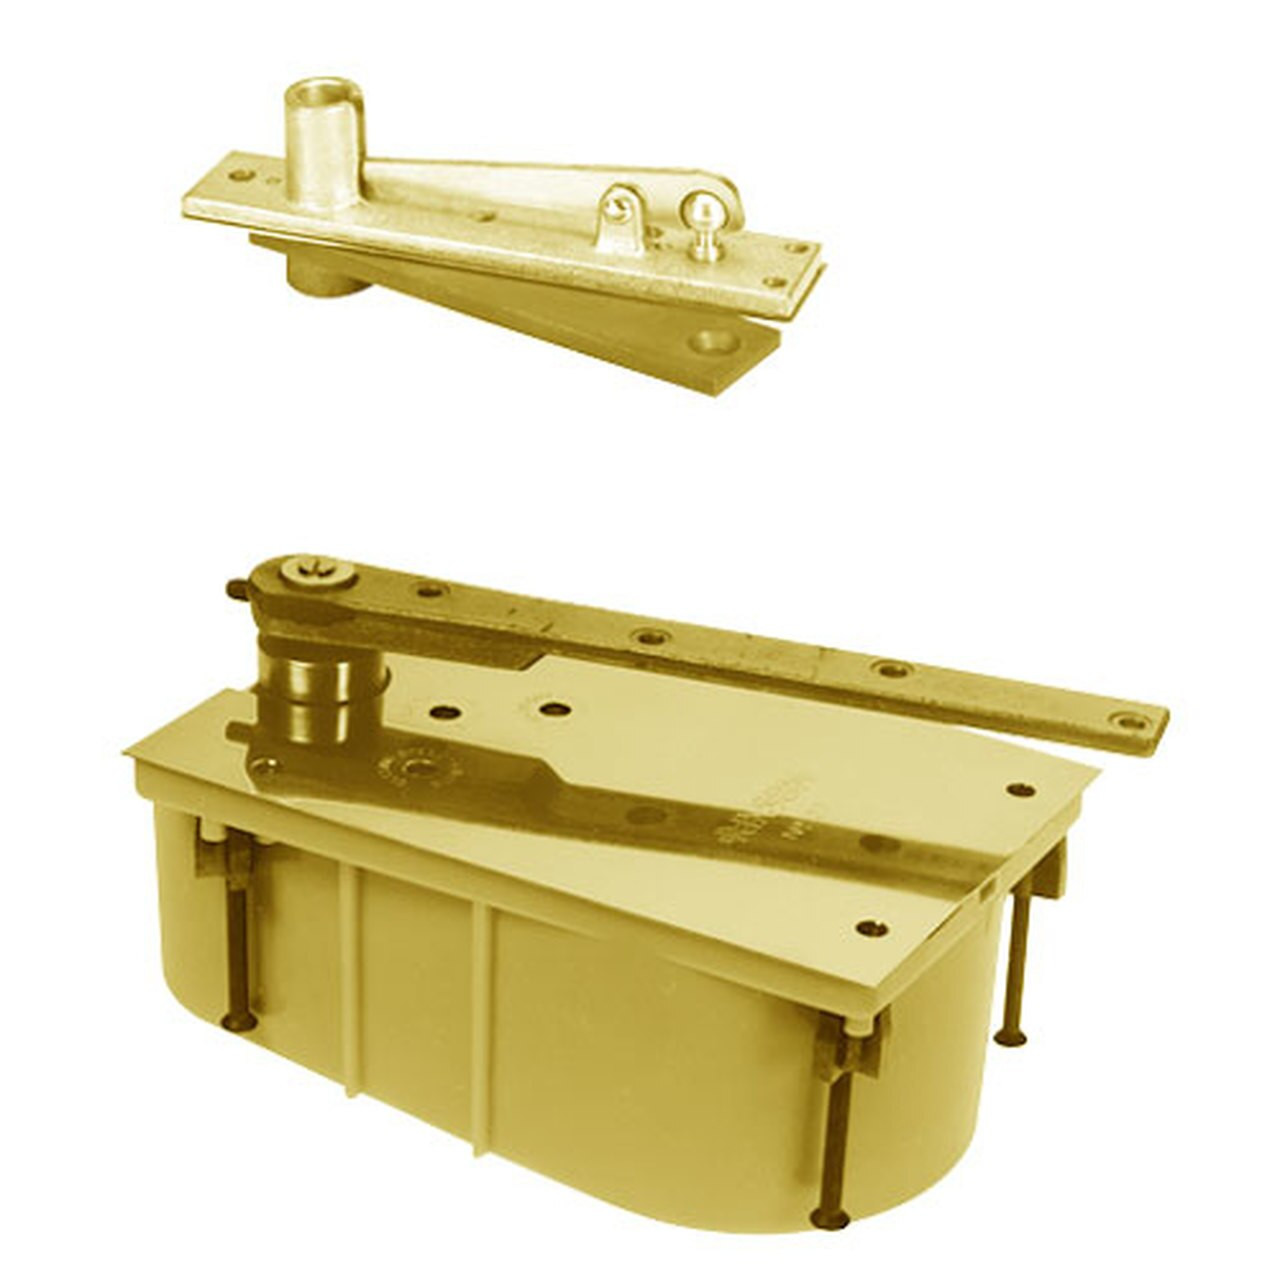 28-85N-554-LCC-LH-605 Rixson 28 Series Heavy Duty Single Acting Center Hung Floor Closer with Concealed Arm in Bright Brass Finish